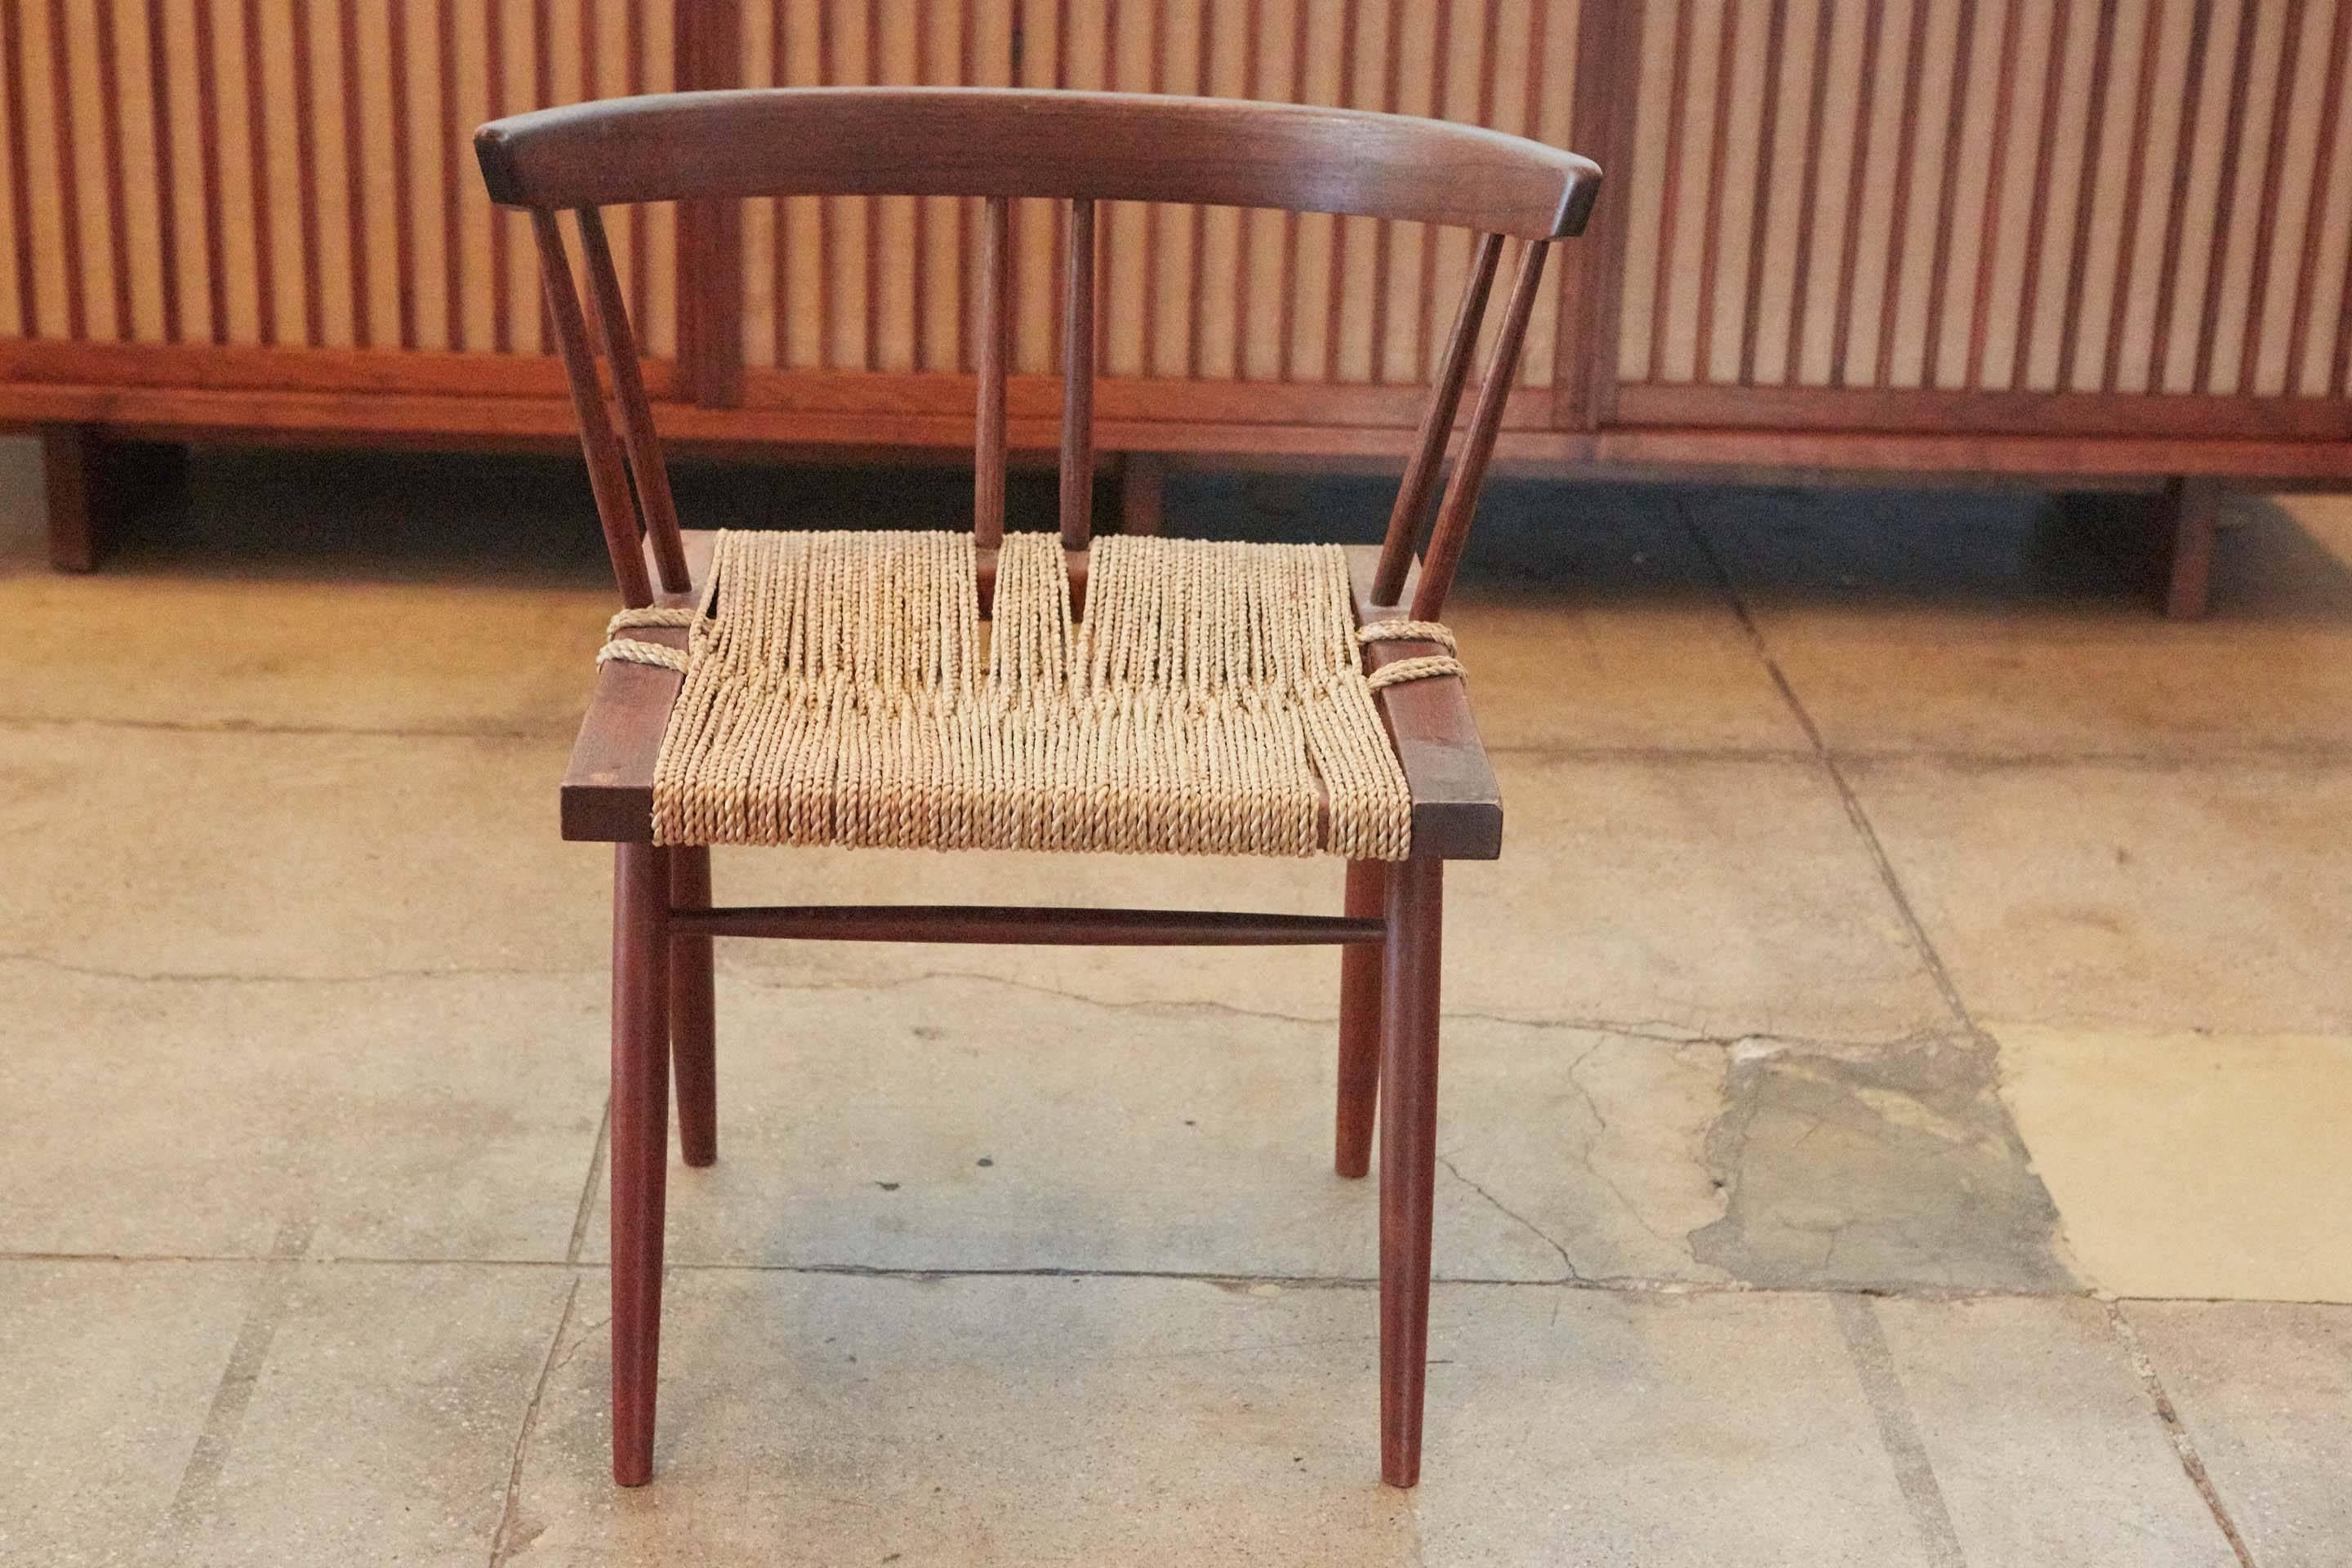 Set of 12 Grass Seat Chairs by George Nakashima, New Hope, Pennsylvania 3